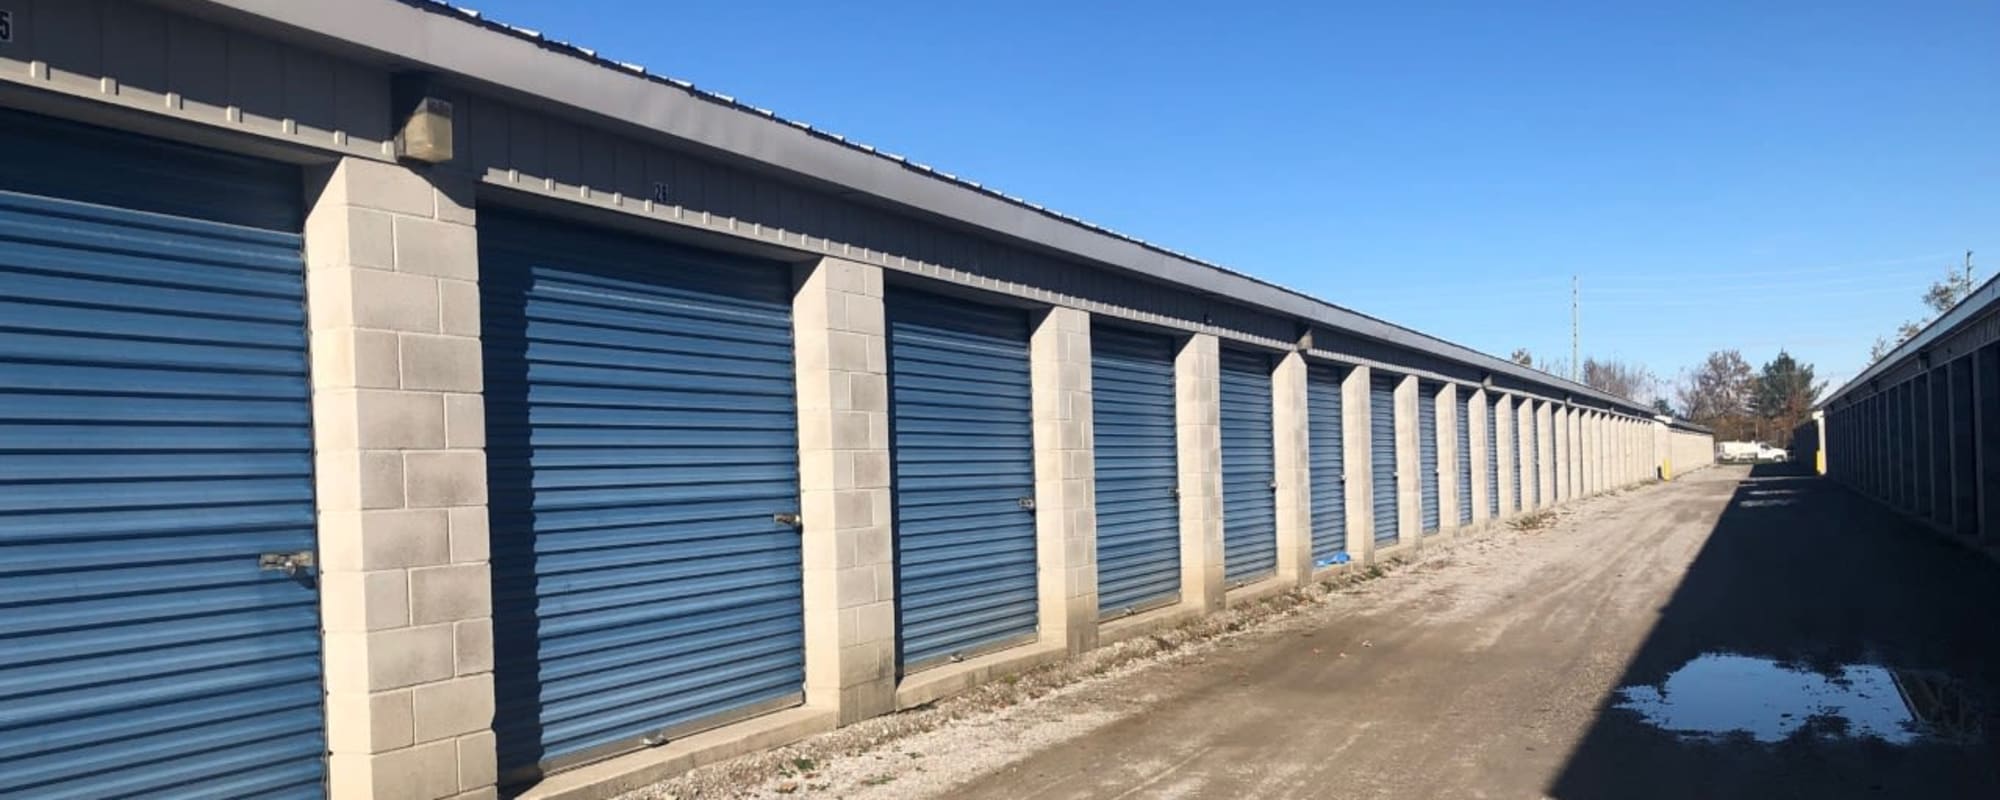 Features at Apple Self Storage - Thorold in Welland, Ontario